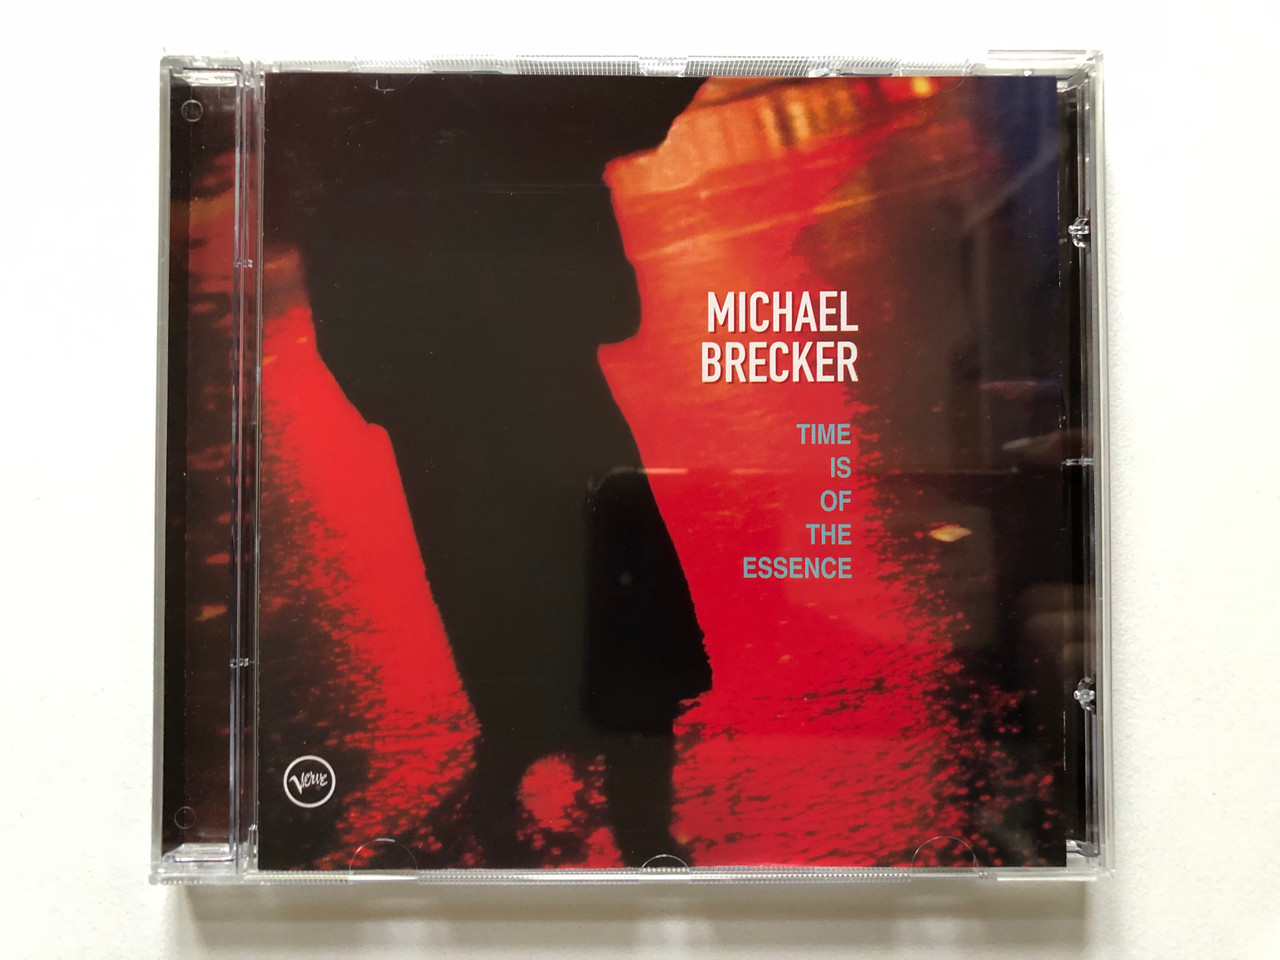 https://cdn10.bigcommerce.com/s-62bdpkt7pb/products/0/images/313324/Michael_Brecker_Time_Is_Of_The_Essence_Verve_Records_Audio_CD_1999_547_844-2_1__84982.1700671300.1280.1280.JPG?c=2